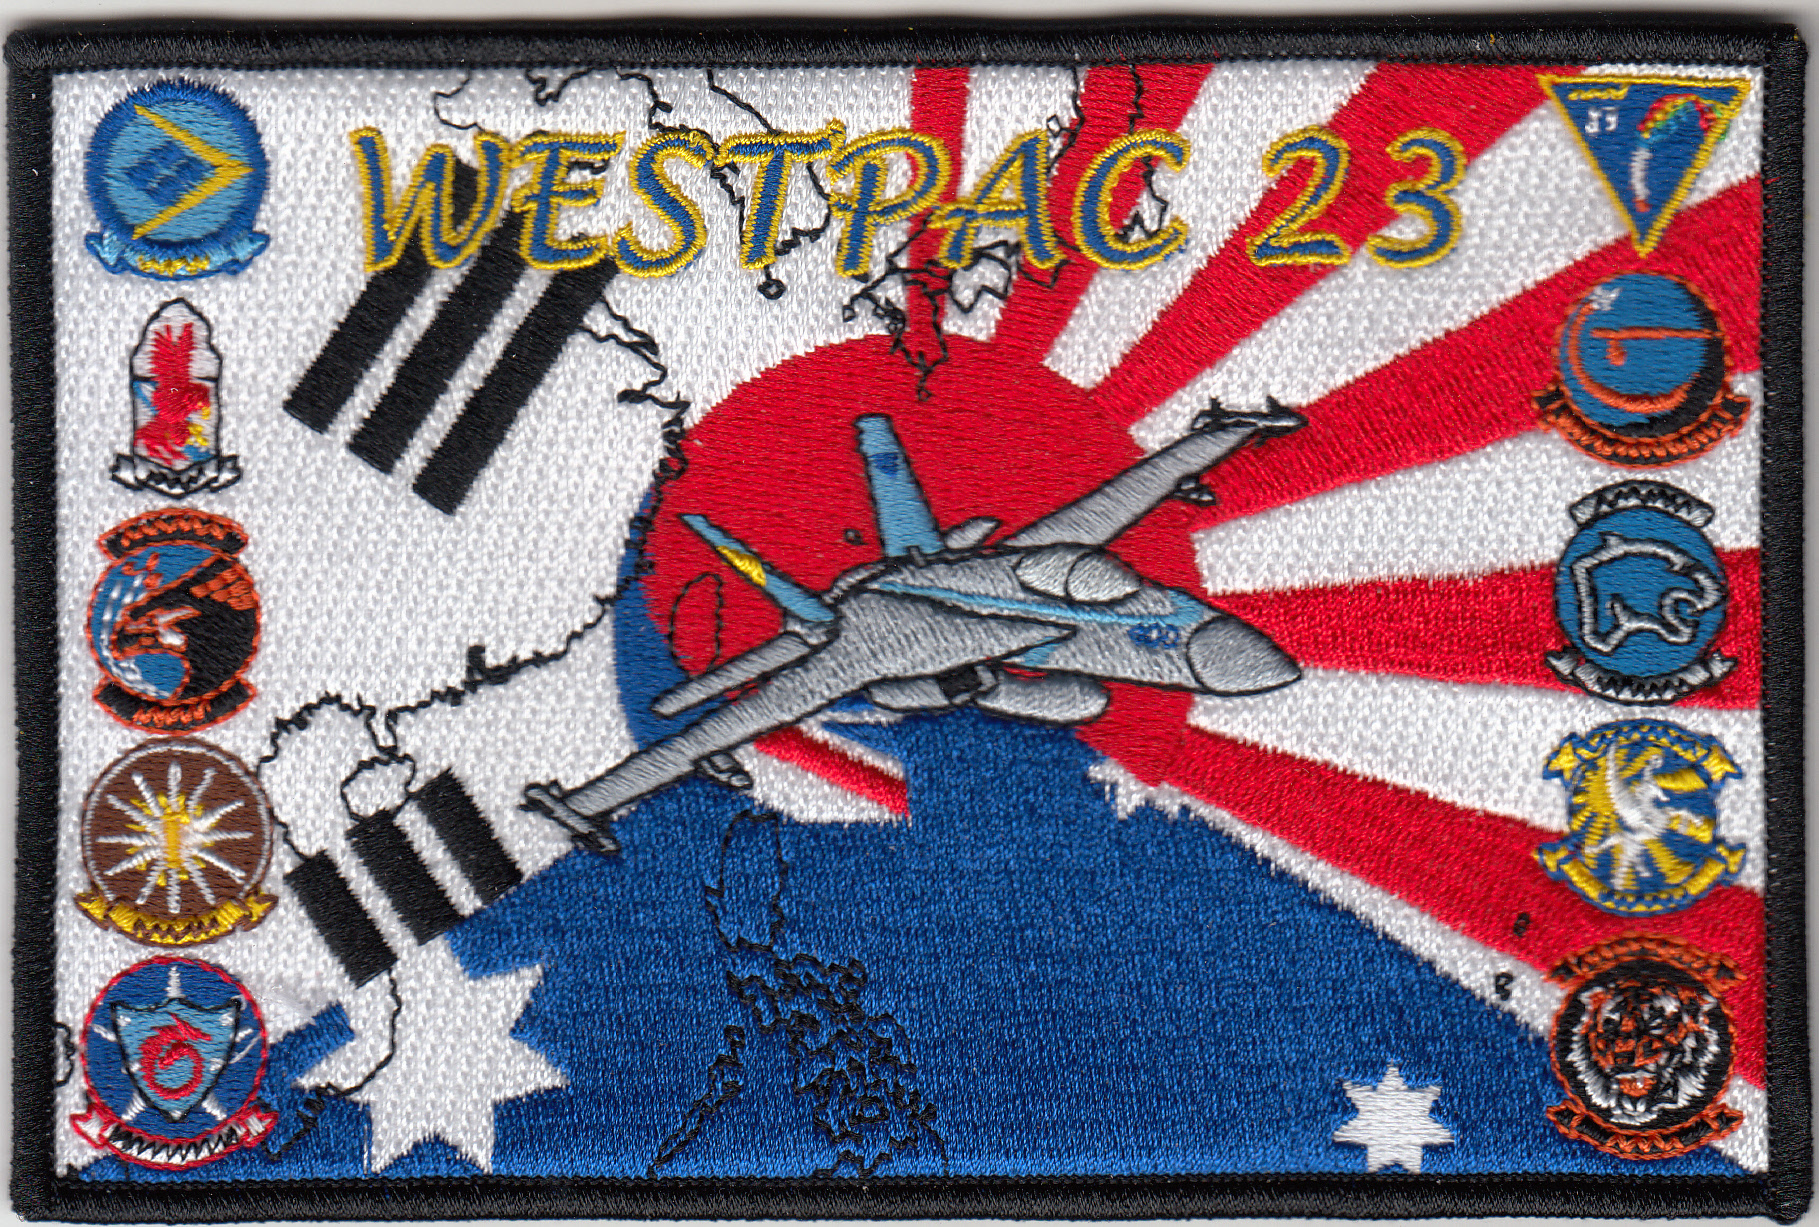 VFA-146 2023 *WESTPAC 2023* Cruise (Rect)